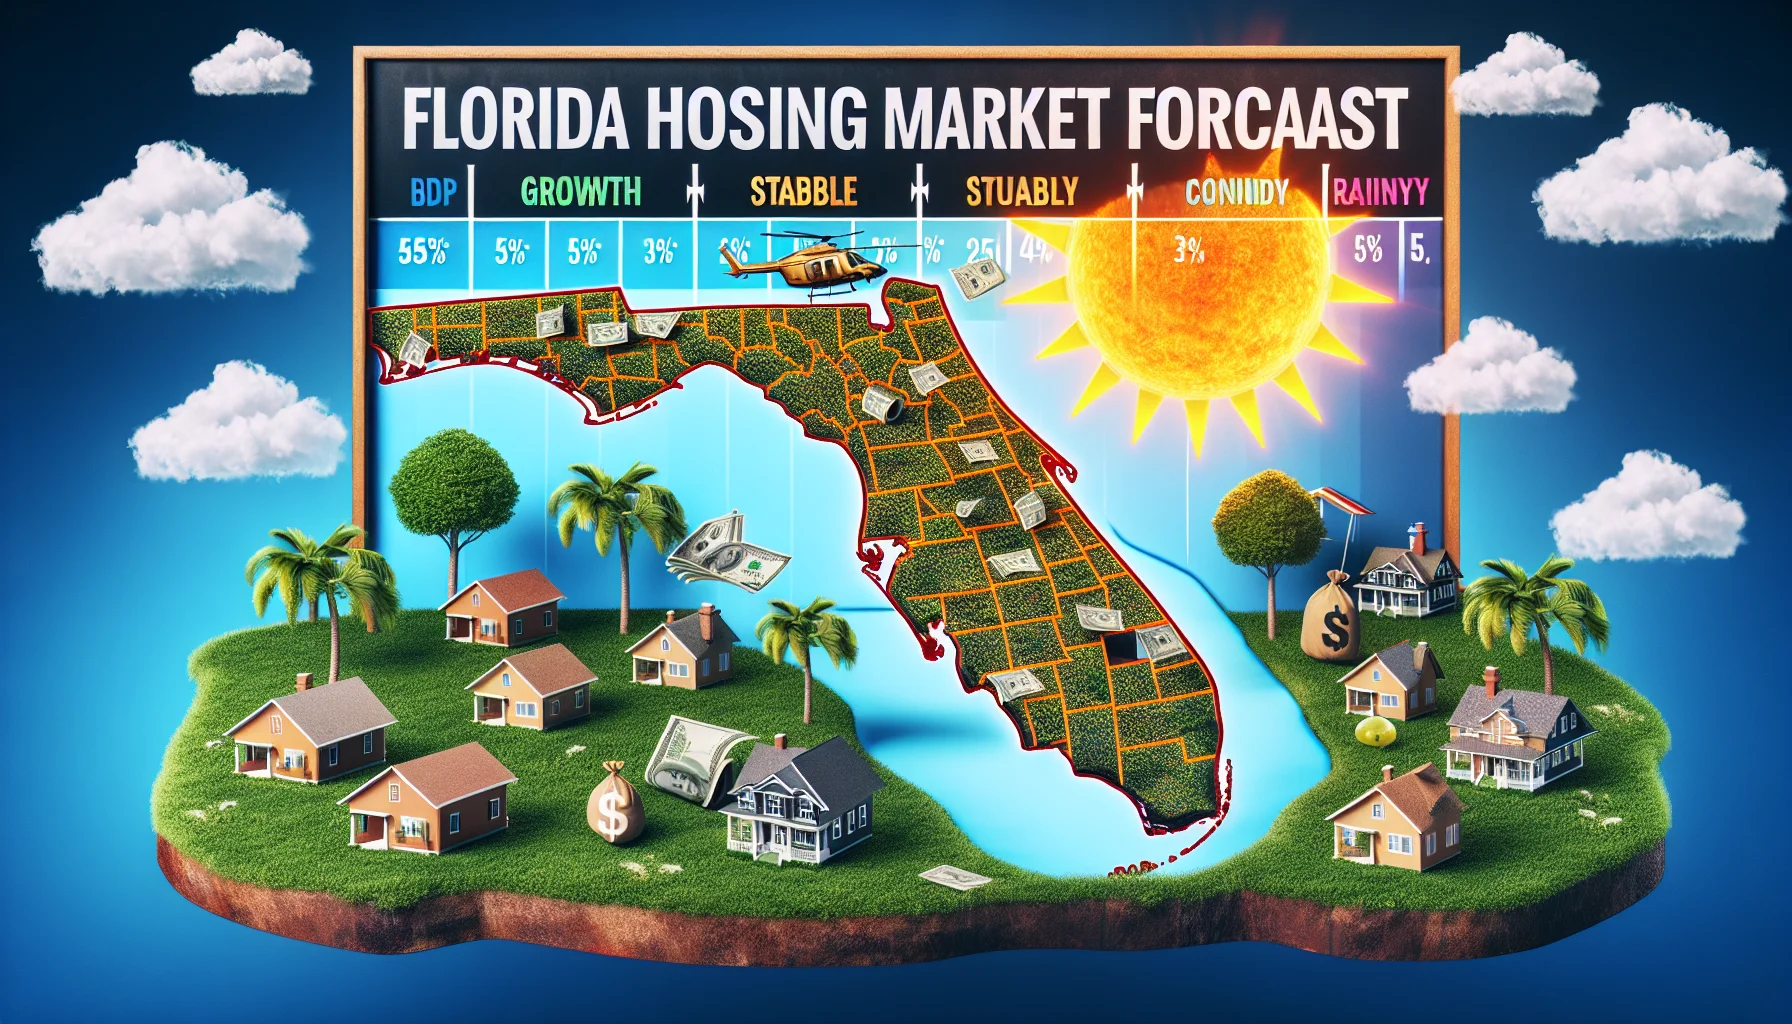 Create a humorous and realistic image representing the ideal state of the Florida housing market forecast. Picture it as an animated weather map. Mark high-growth areas as bright sunshine, stable zones as partly cloudy, and declining regions as rainy. Include little houses and money trees growing together with helicopter views over some of the best properties. Animate a rising sun in the backdrop, symbolizing growth and prosperity in the real-estate market.